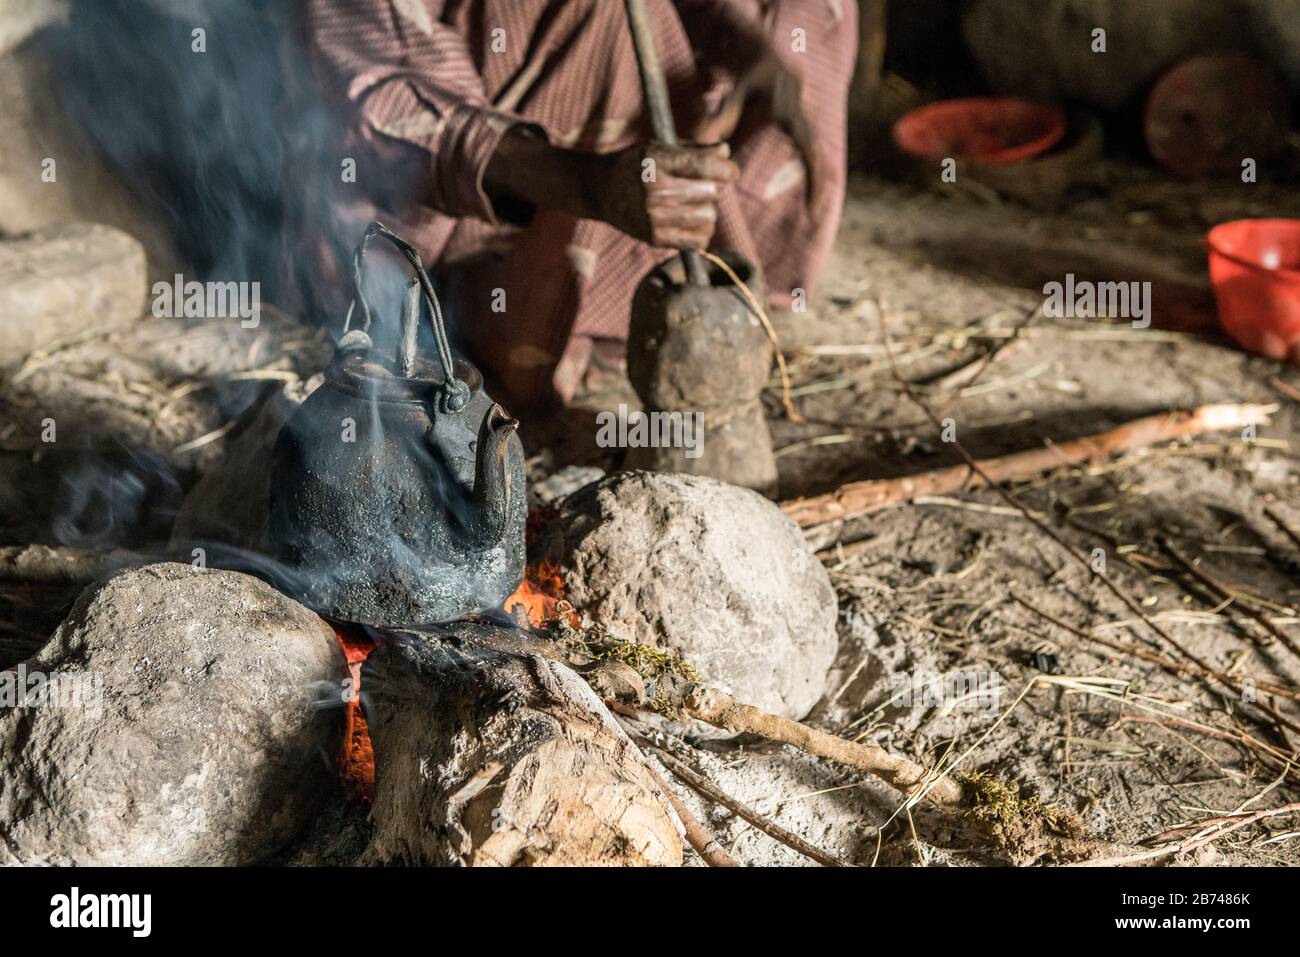 Brewing coffee over an open fire, Simien Mountains, Ethiopia Stock Photo